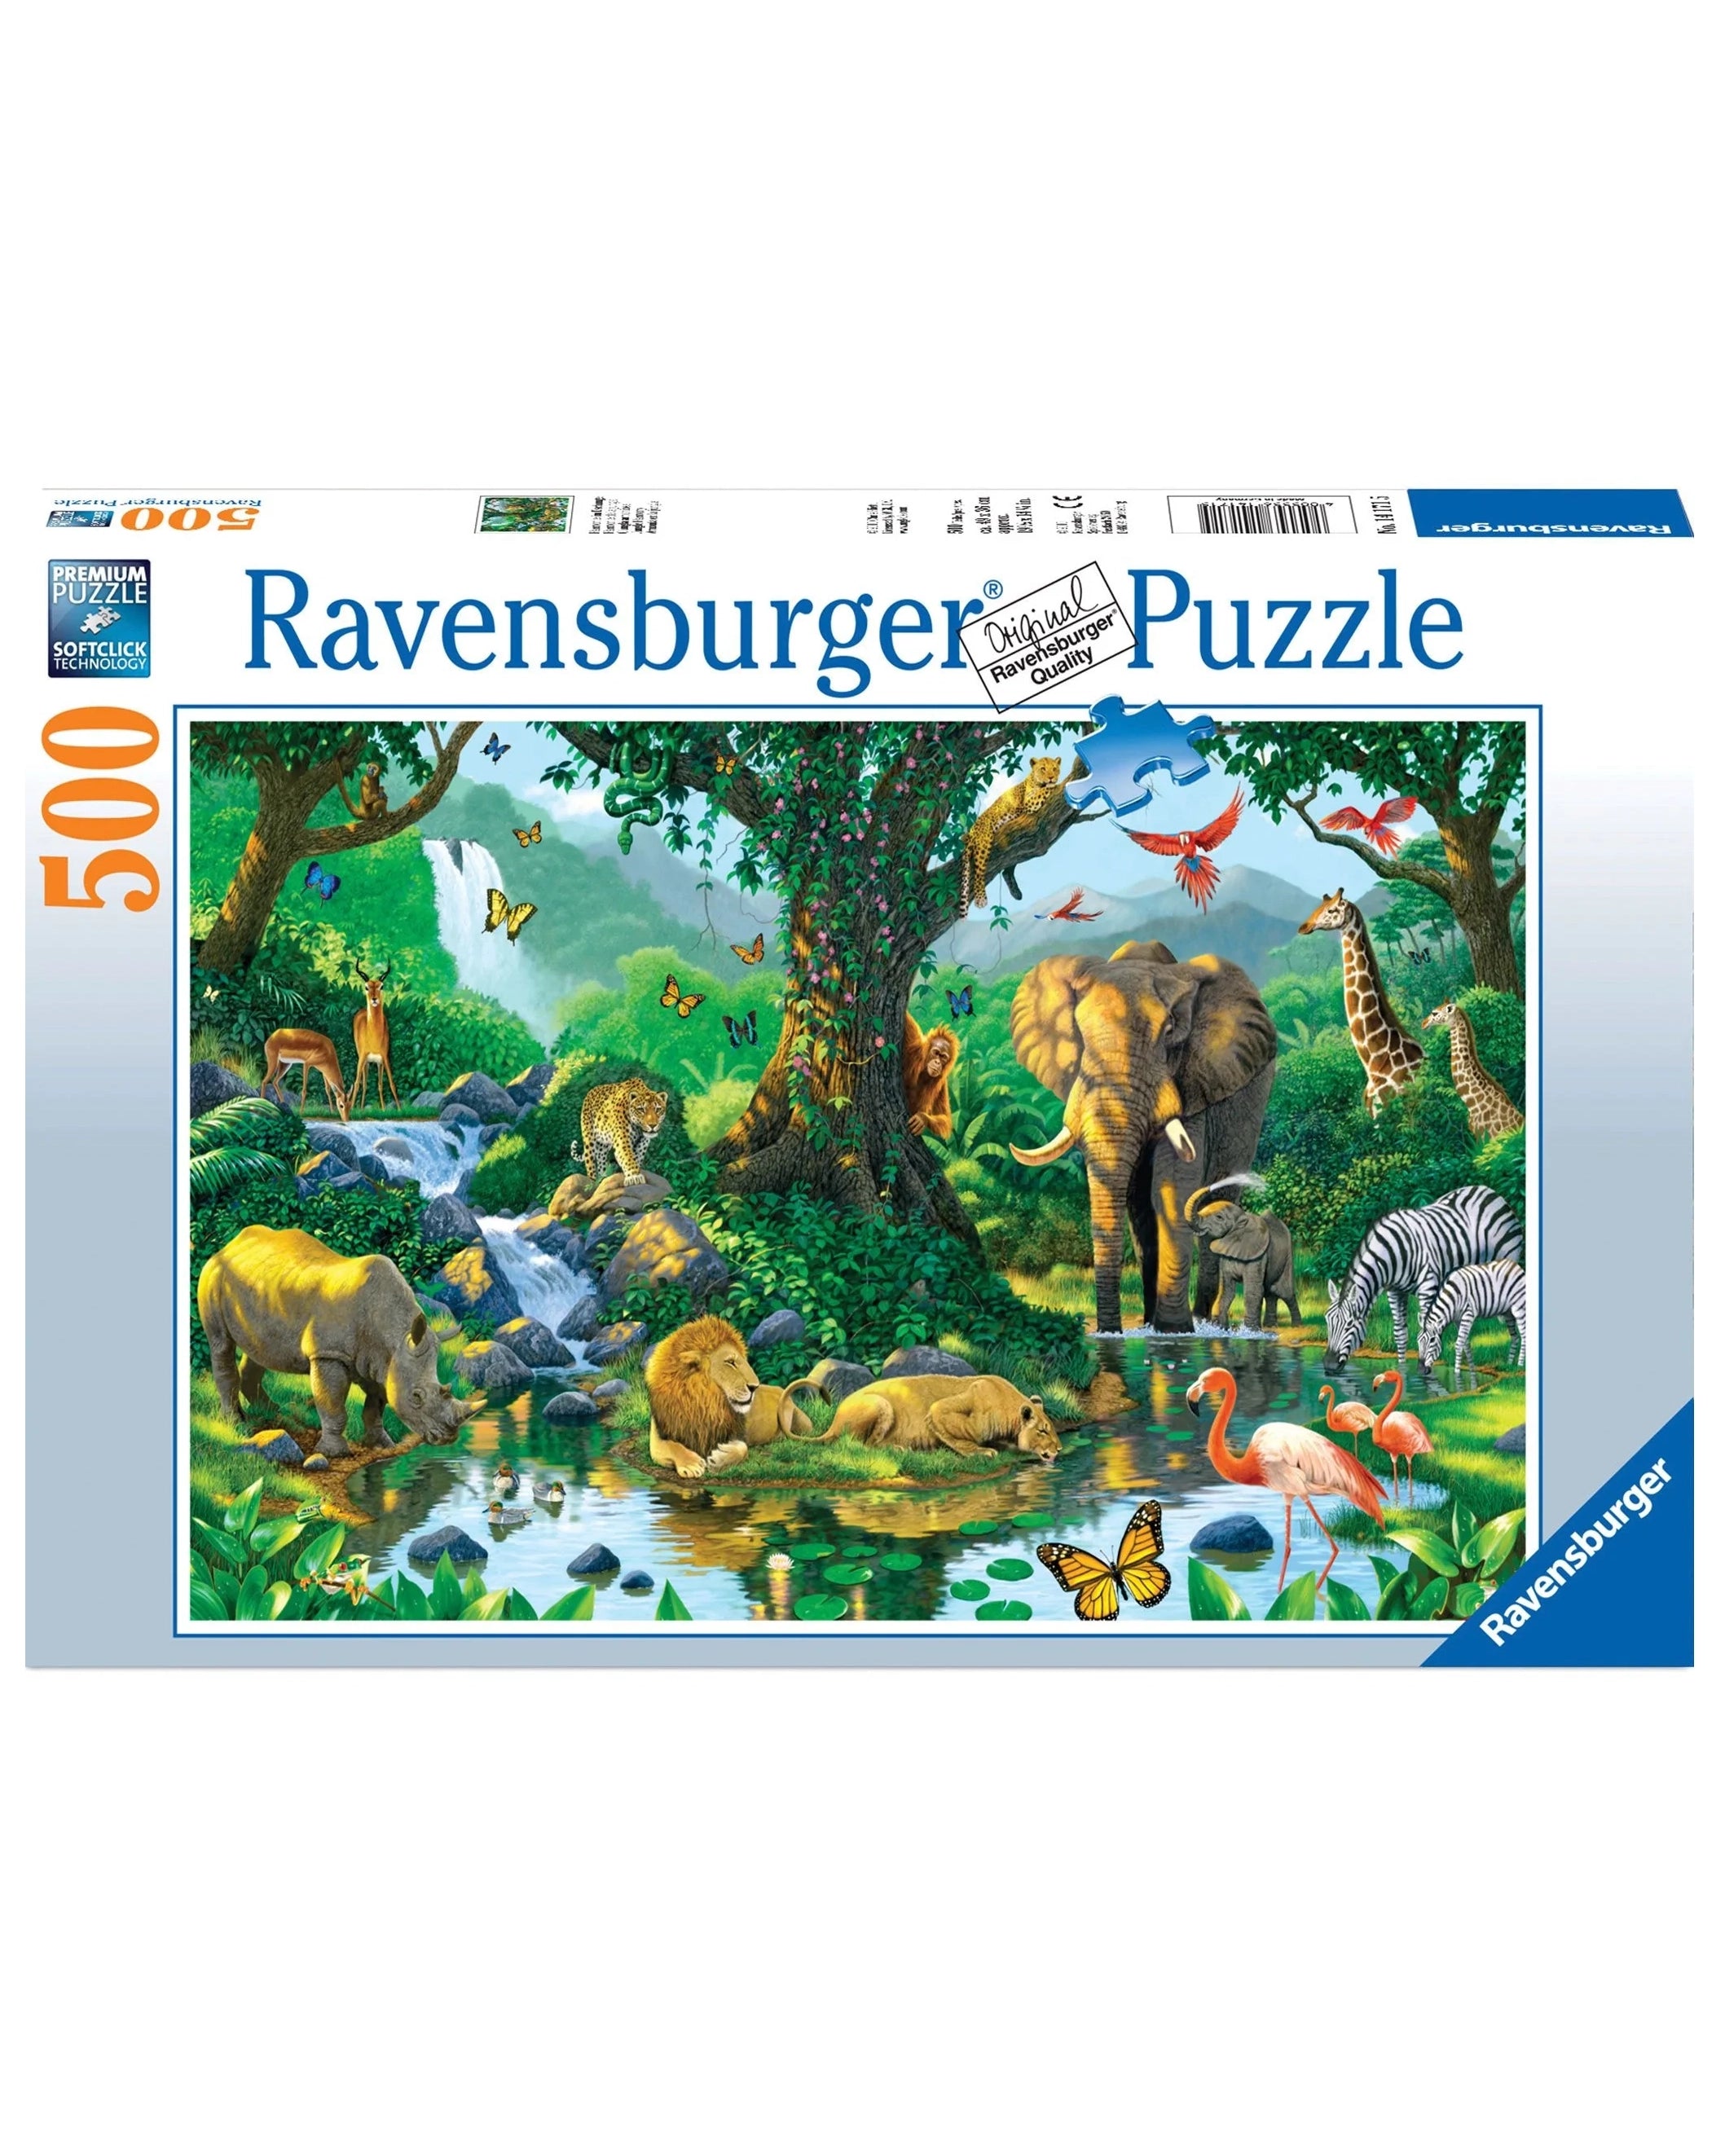 Ravensburger Puzzle - Harmony In The Jungle Puzzle 500pc